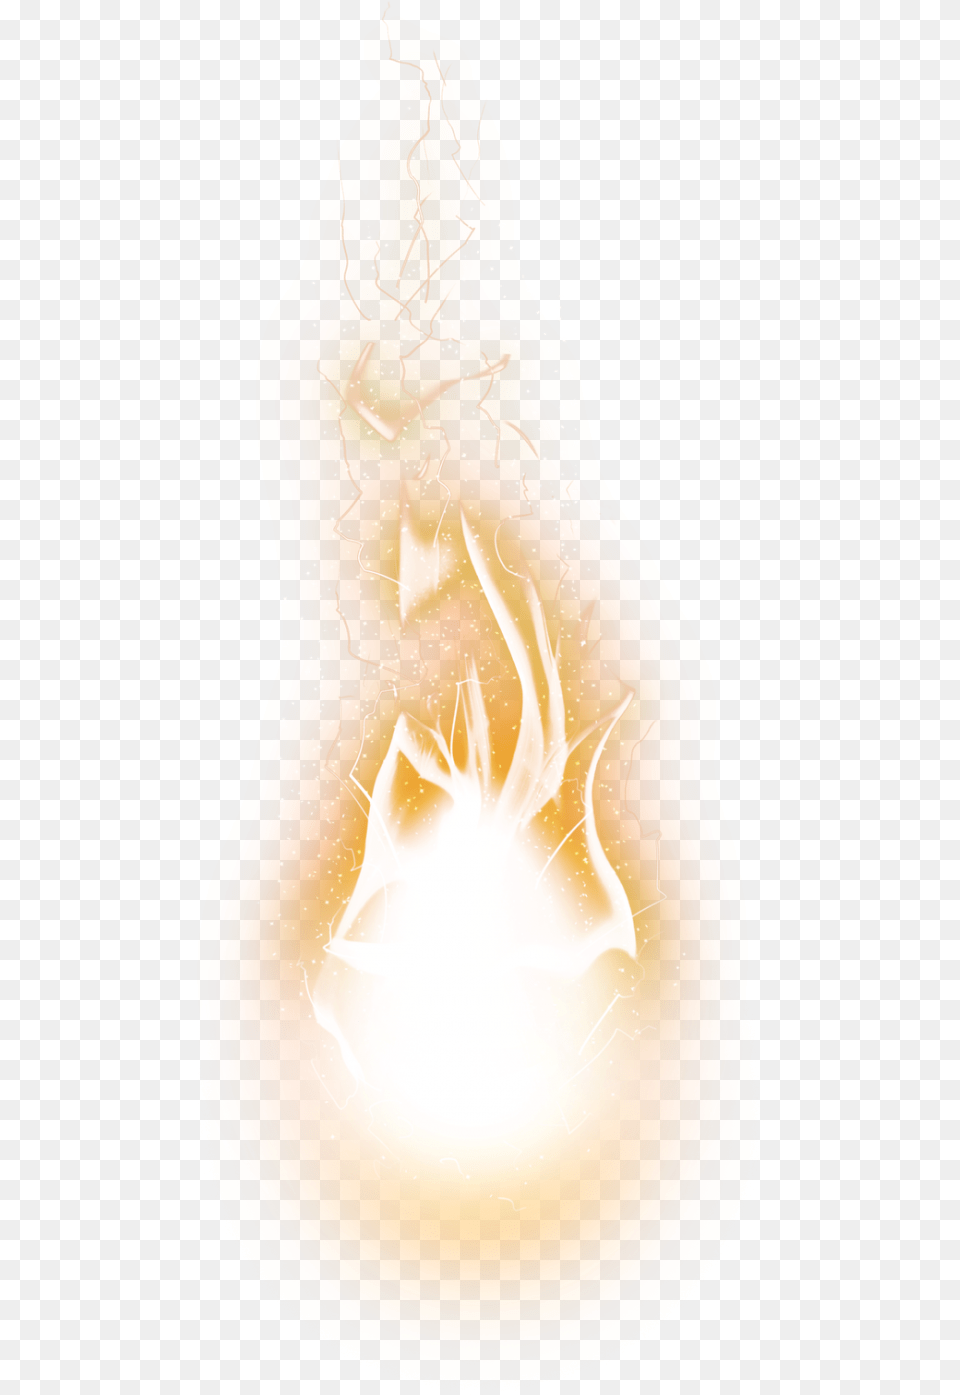 New Effect Background, Accessories, Fire, Flame, Jewelry Png Image